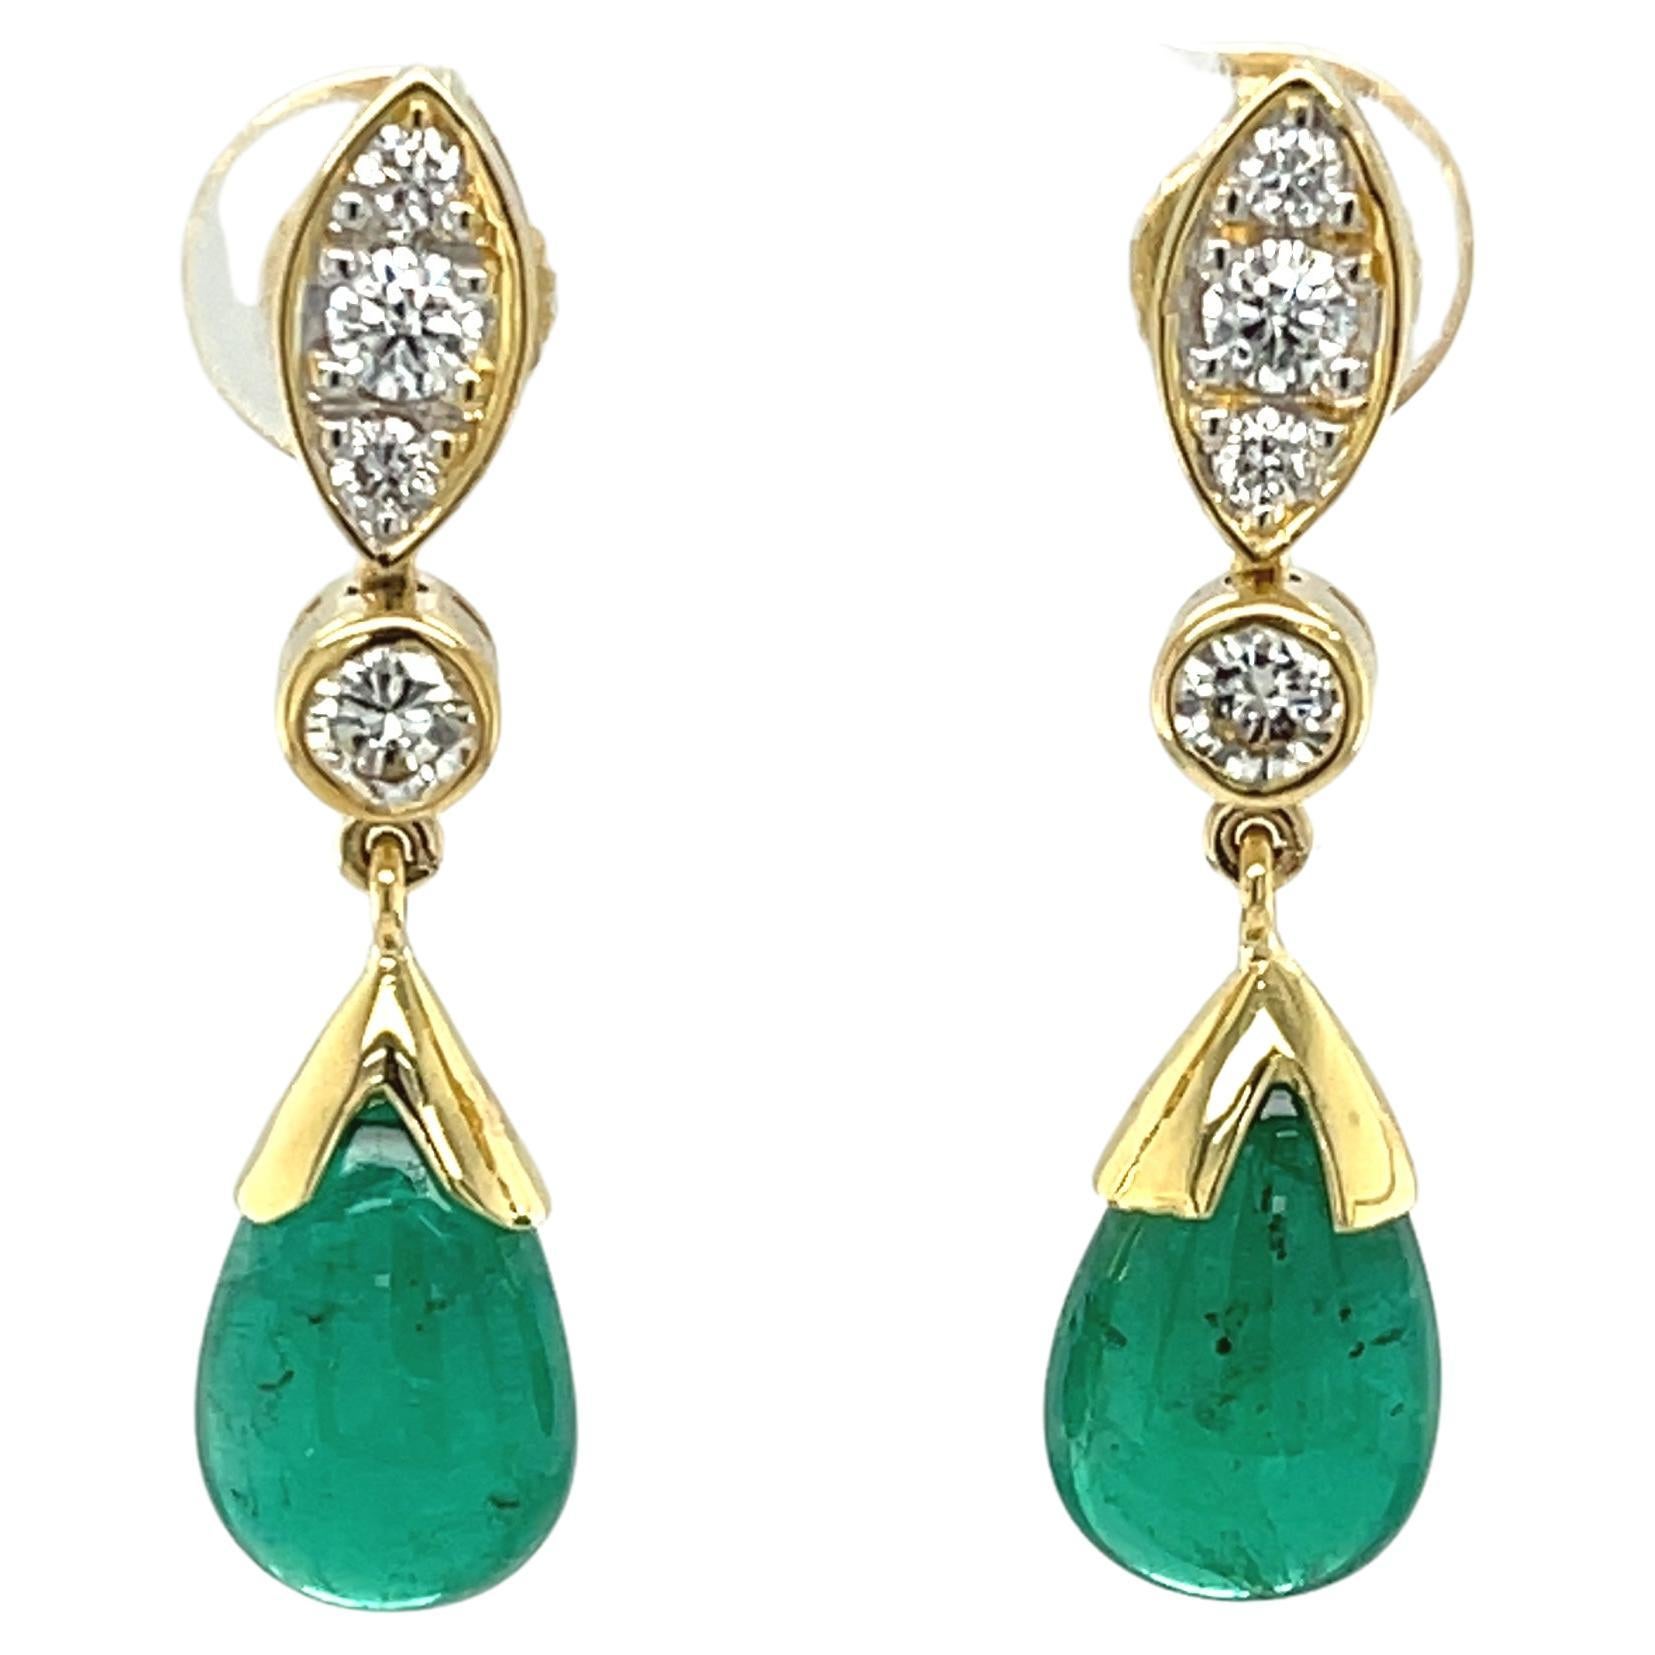 These gorgeous earrings pair luxurious emerald drops with sparkling diamonds and 18k yellow gold for a look of ultimate glamour and sophistication! The emeralds are beautifully matched and boast perfect emerald green color. Set in 18k yellow gold